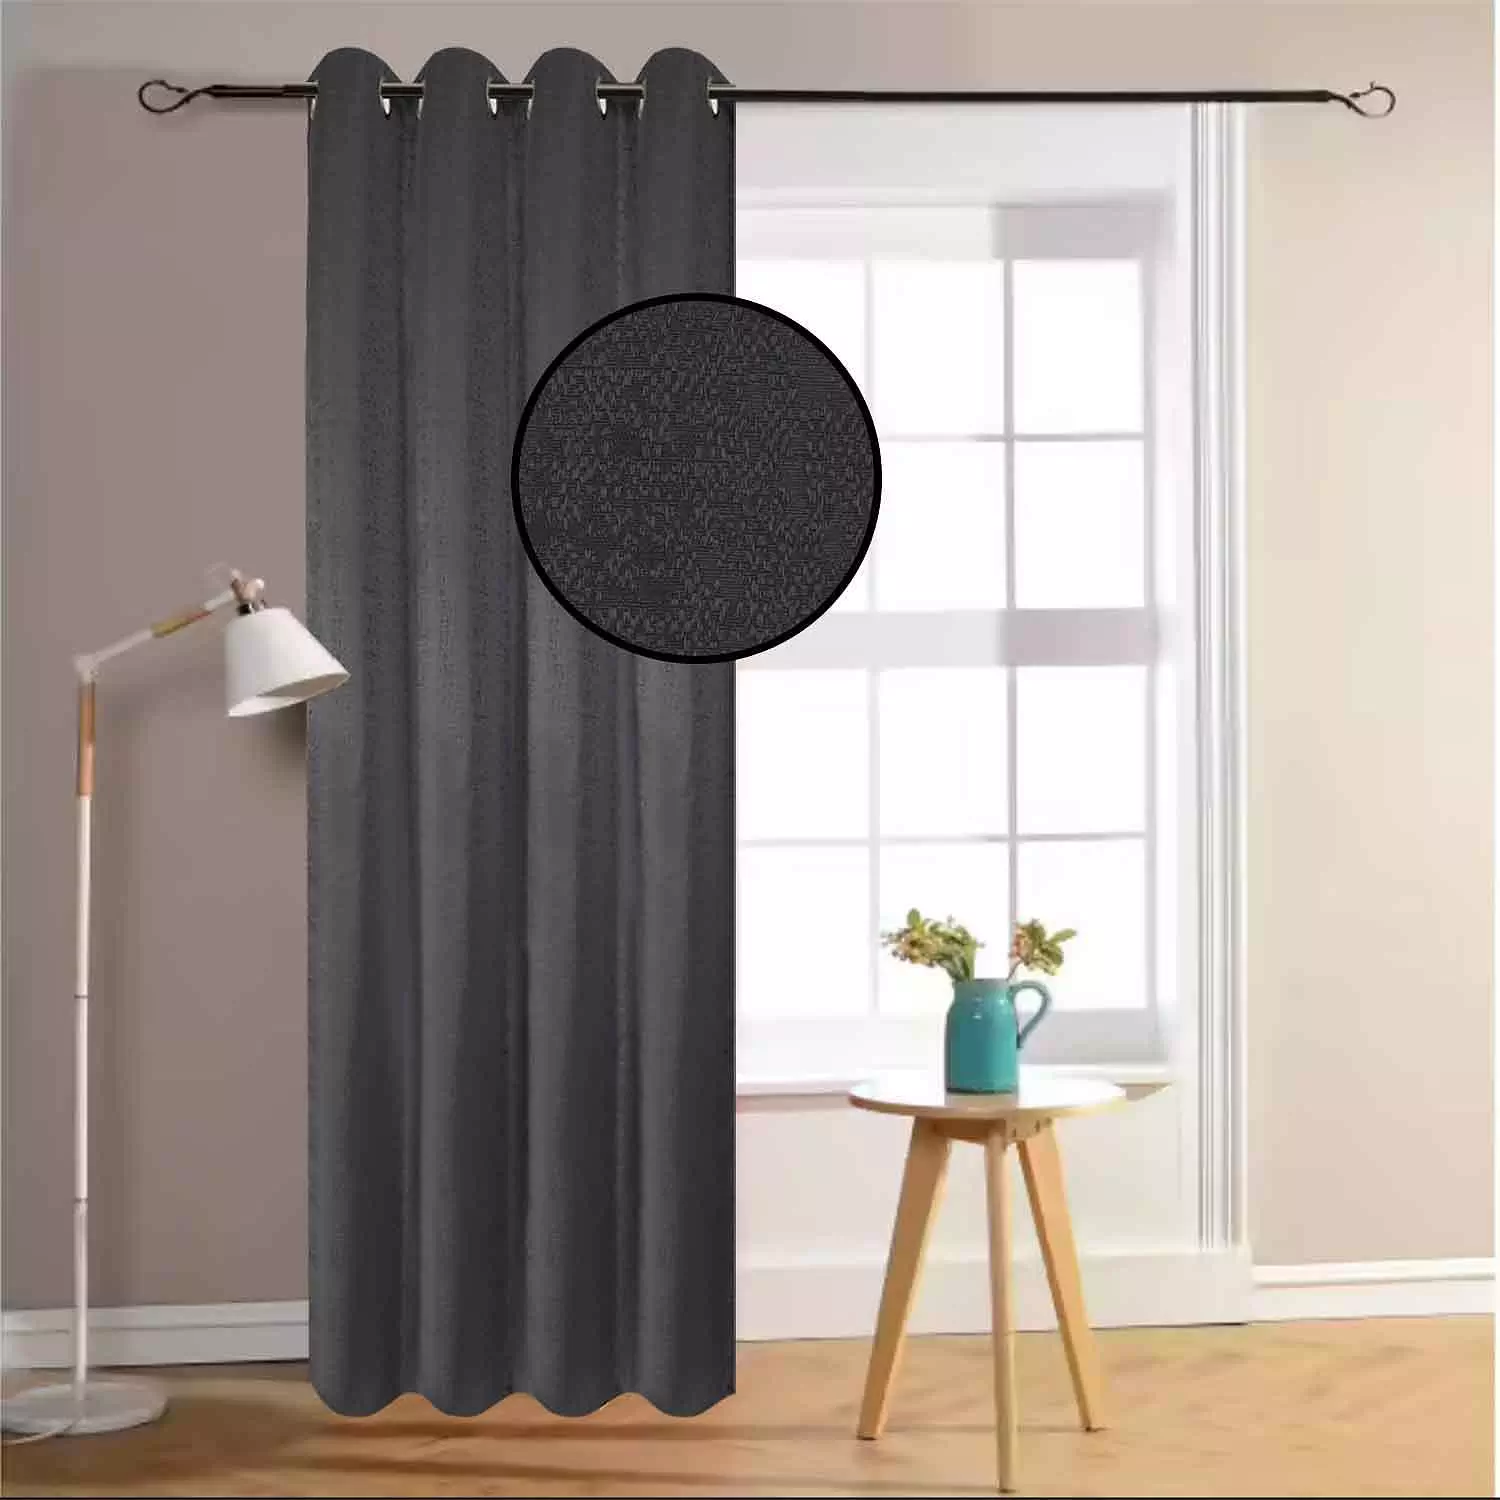 Ultimate blackout curtain with metal grommets, 54"x84", dark grey